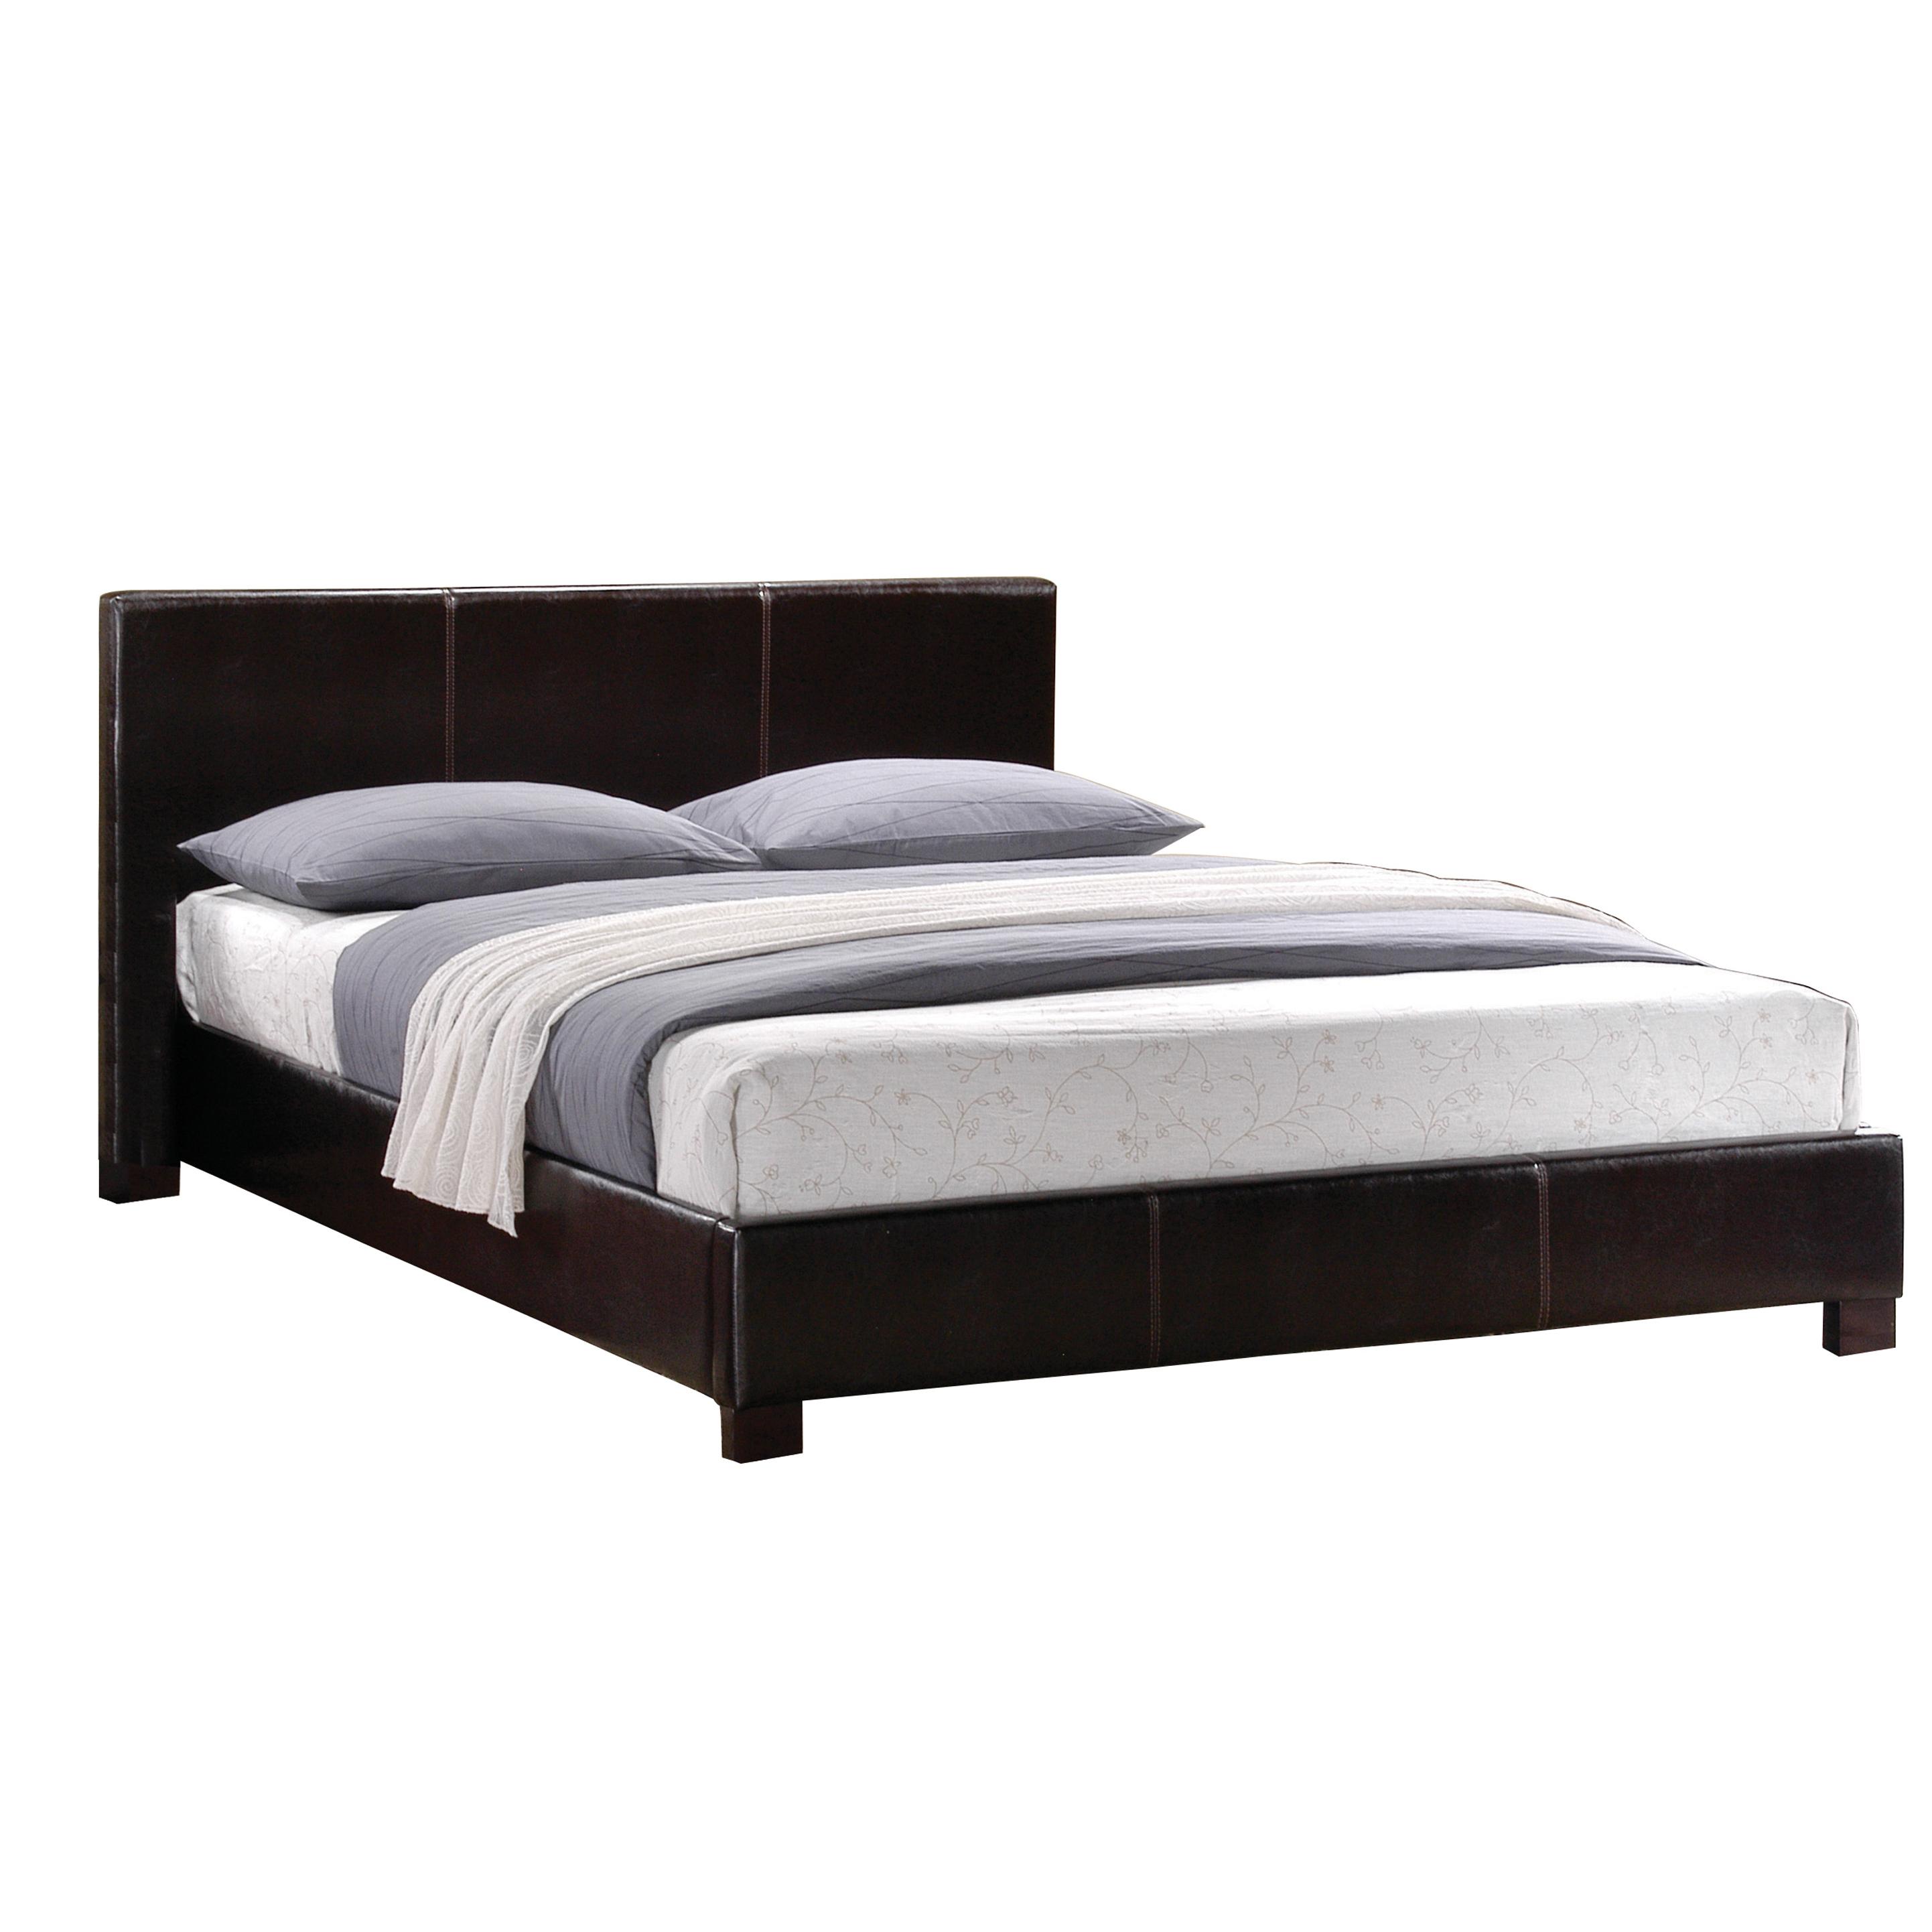 Transitional Bed 5790-1* Zoey 5790-1* in Dark Brown Faux Leather